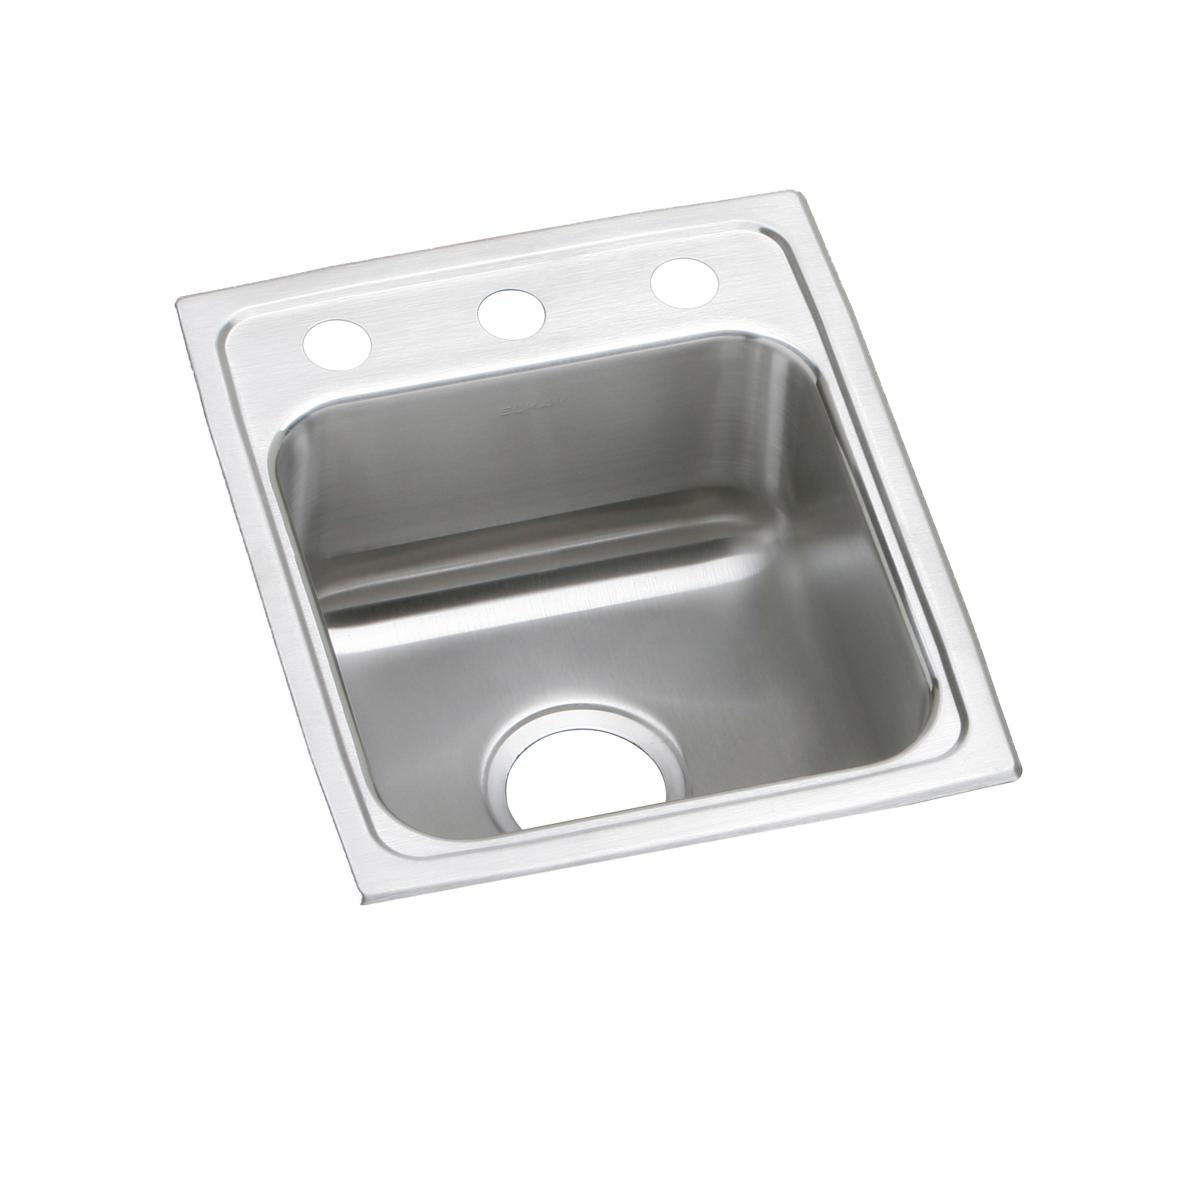 Elkay Lustertone Classic 15" x 17-1/2" x 5" Single Bowl Drop-in ADA Sink with Quick-clip